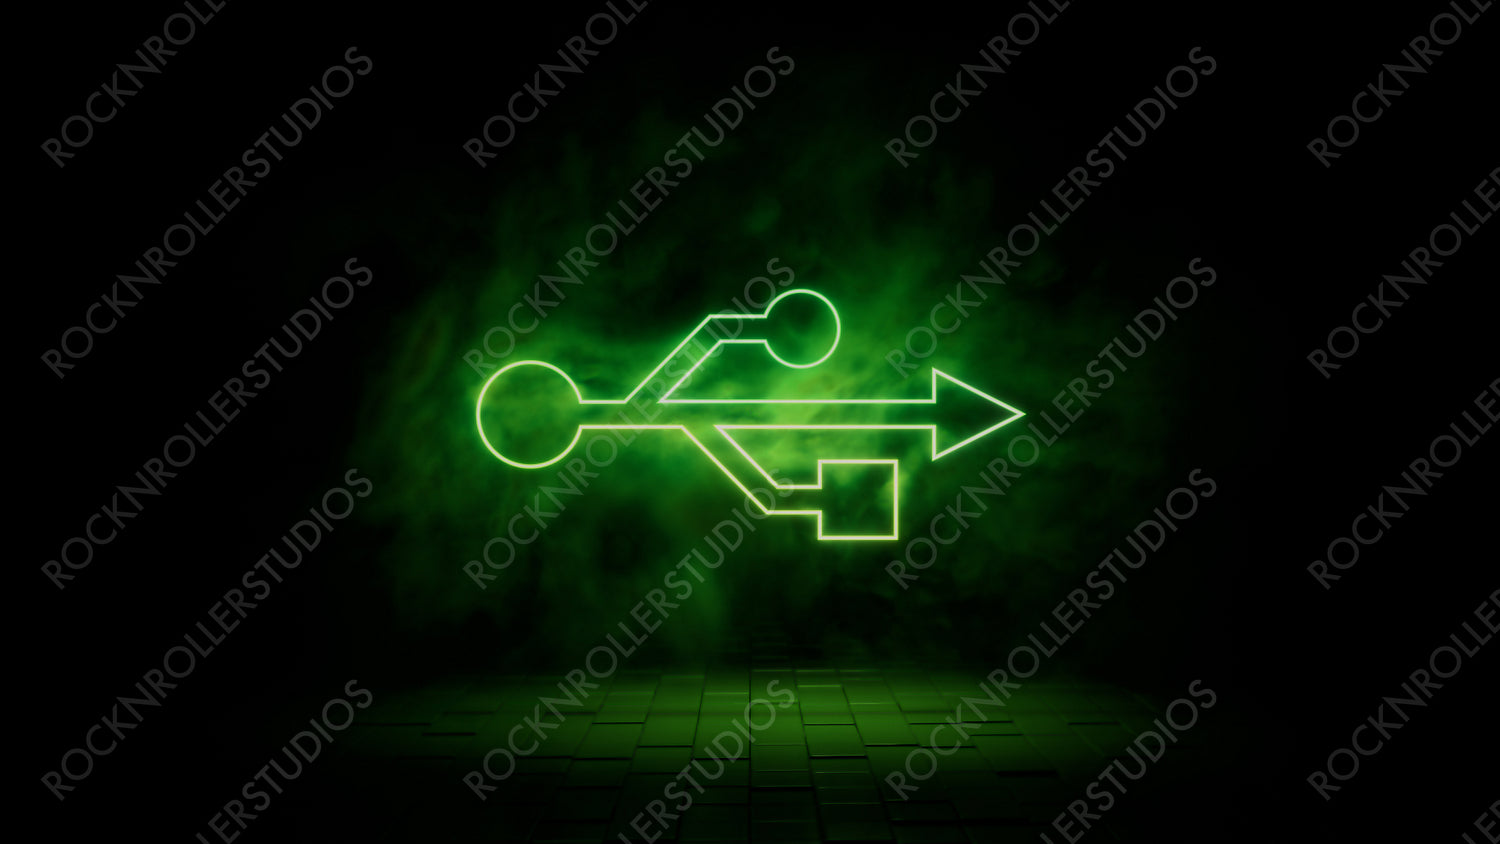 Green neon light usb icon. Vibrant colored technology symbol, isolated on a black background. 3D Render